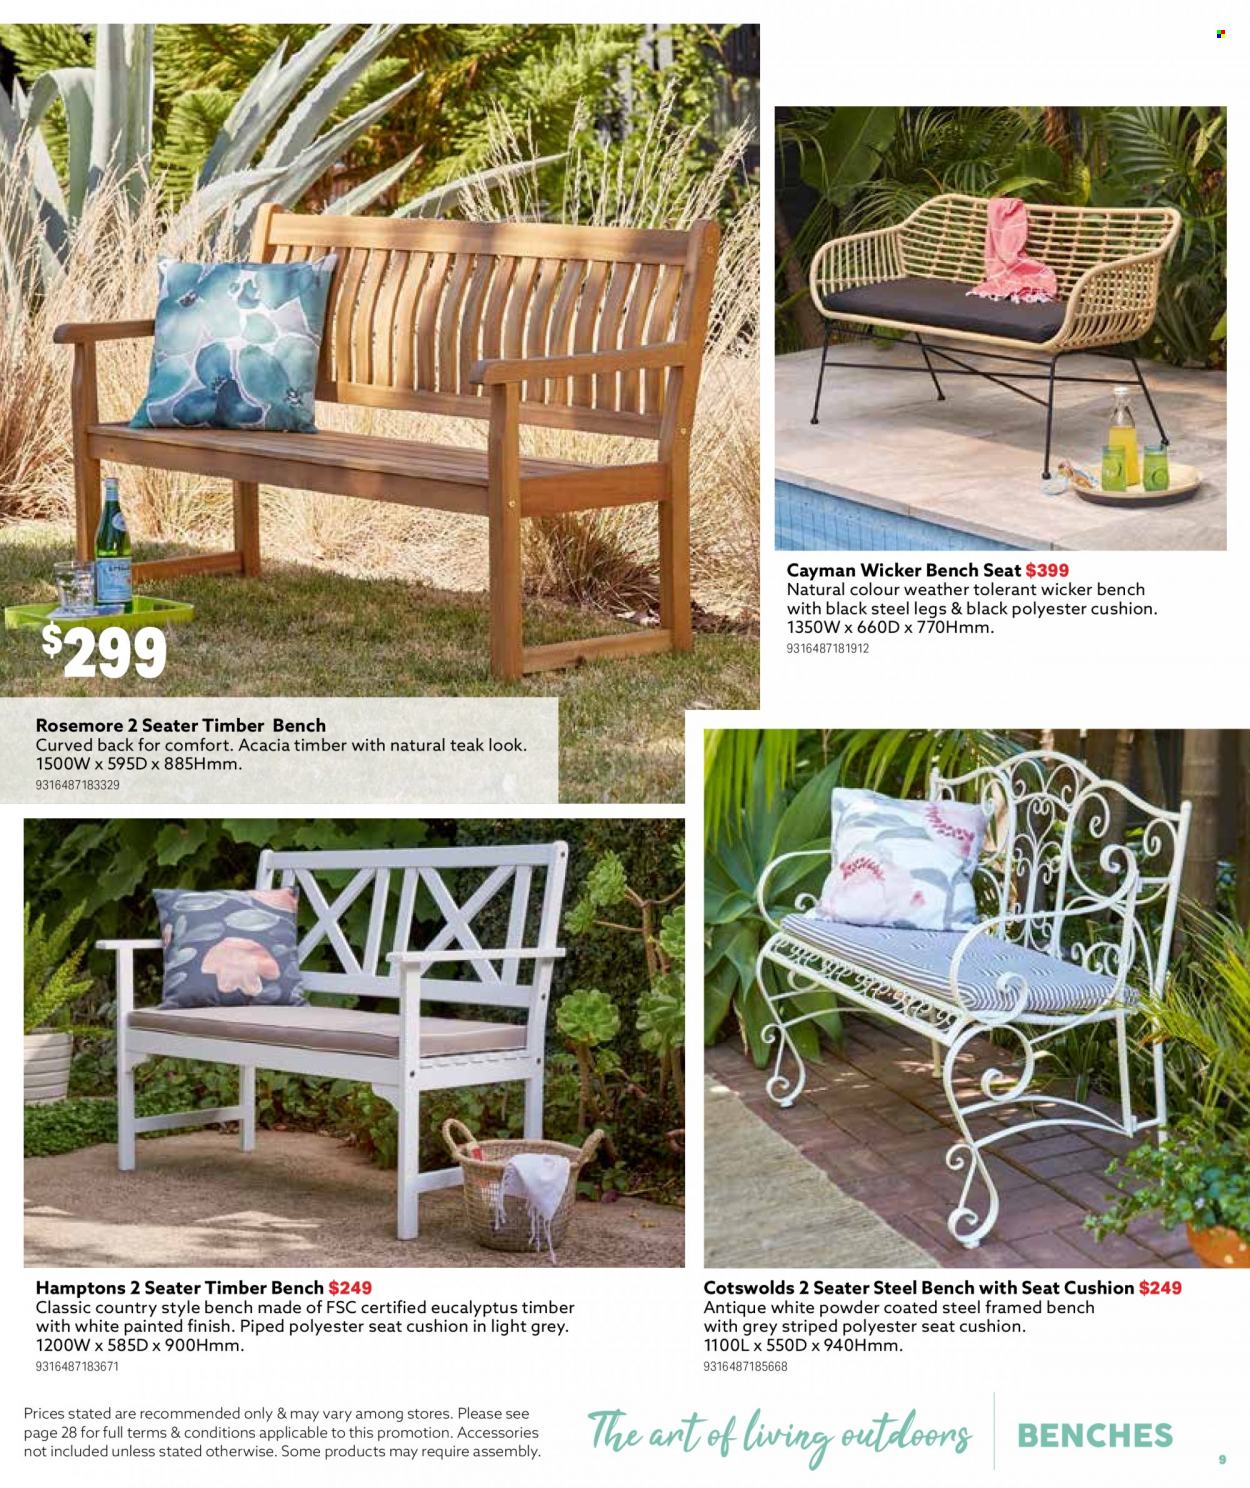 thumbnail - Mitre 10 Catalogue - 14 Sep 2022 - 31 Dec 2022 - Sales products - cushion, bench, wicker bench. Page 9.